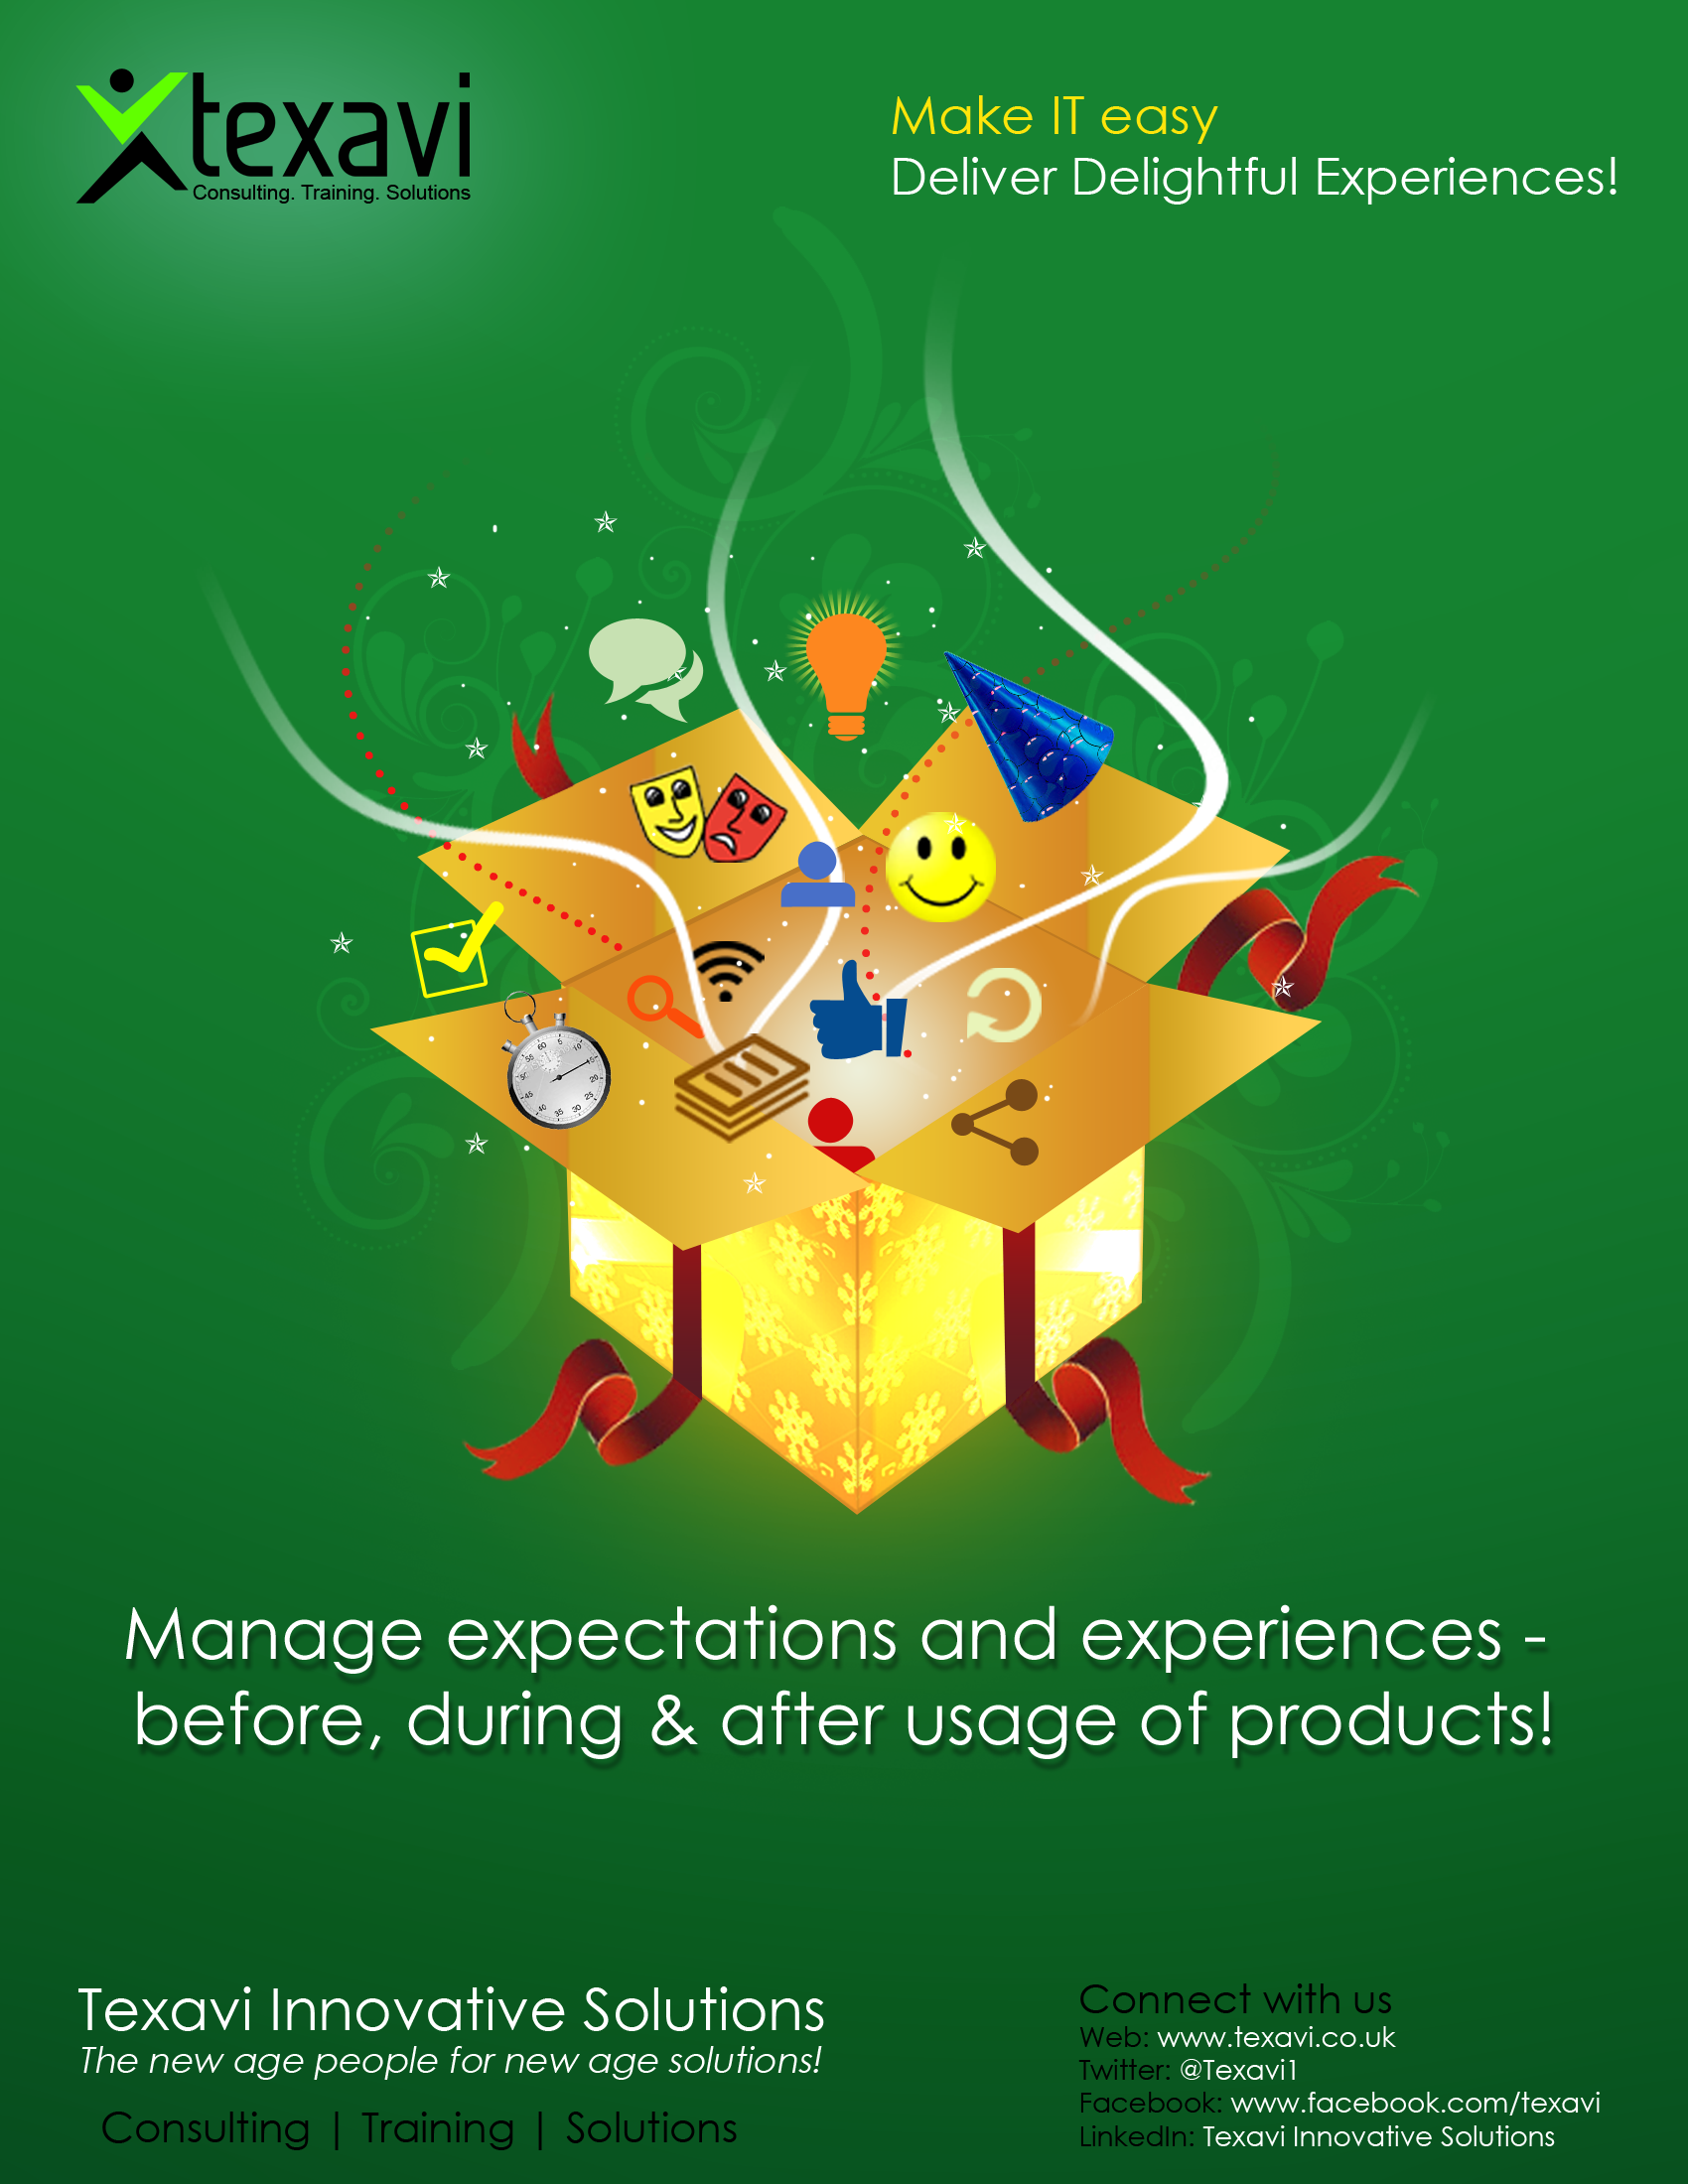 Manage users expectations and experiences